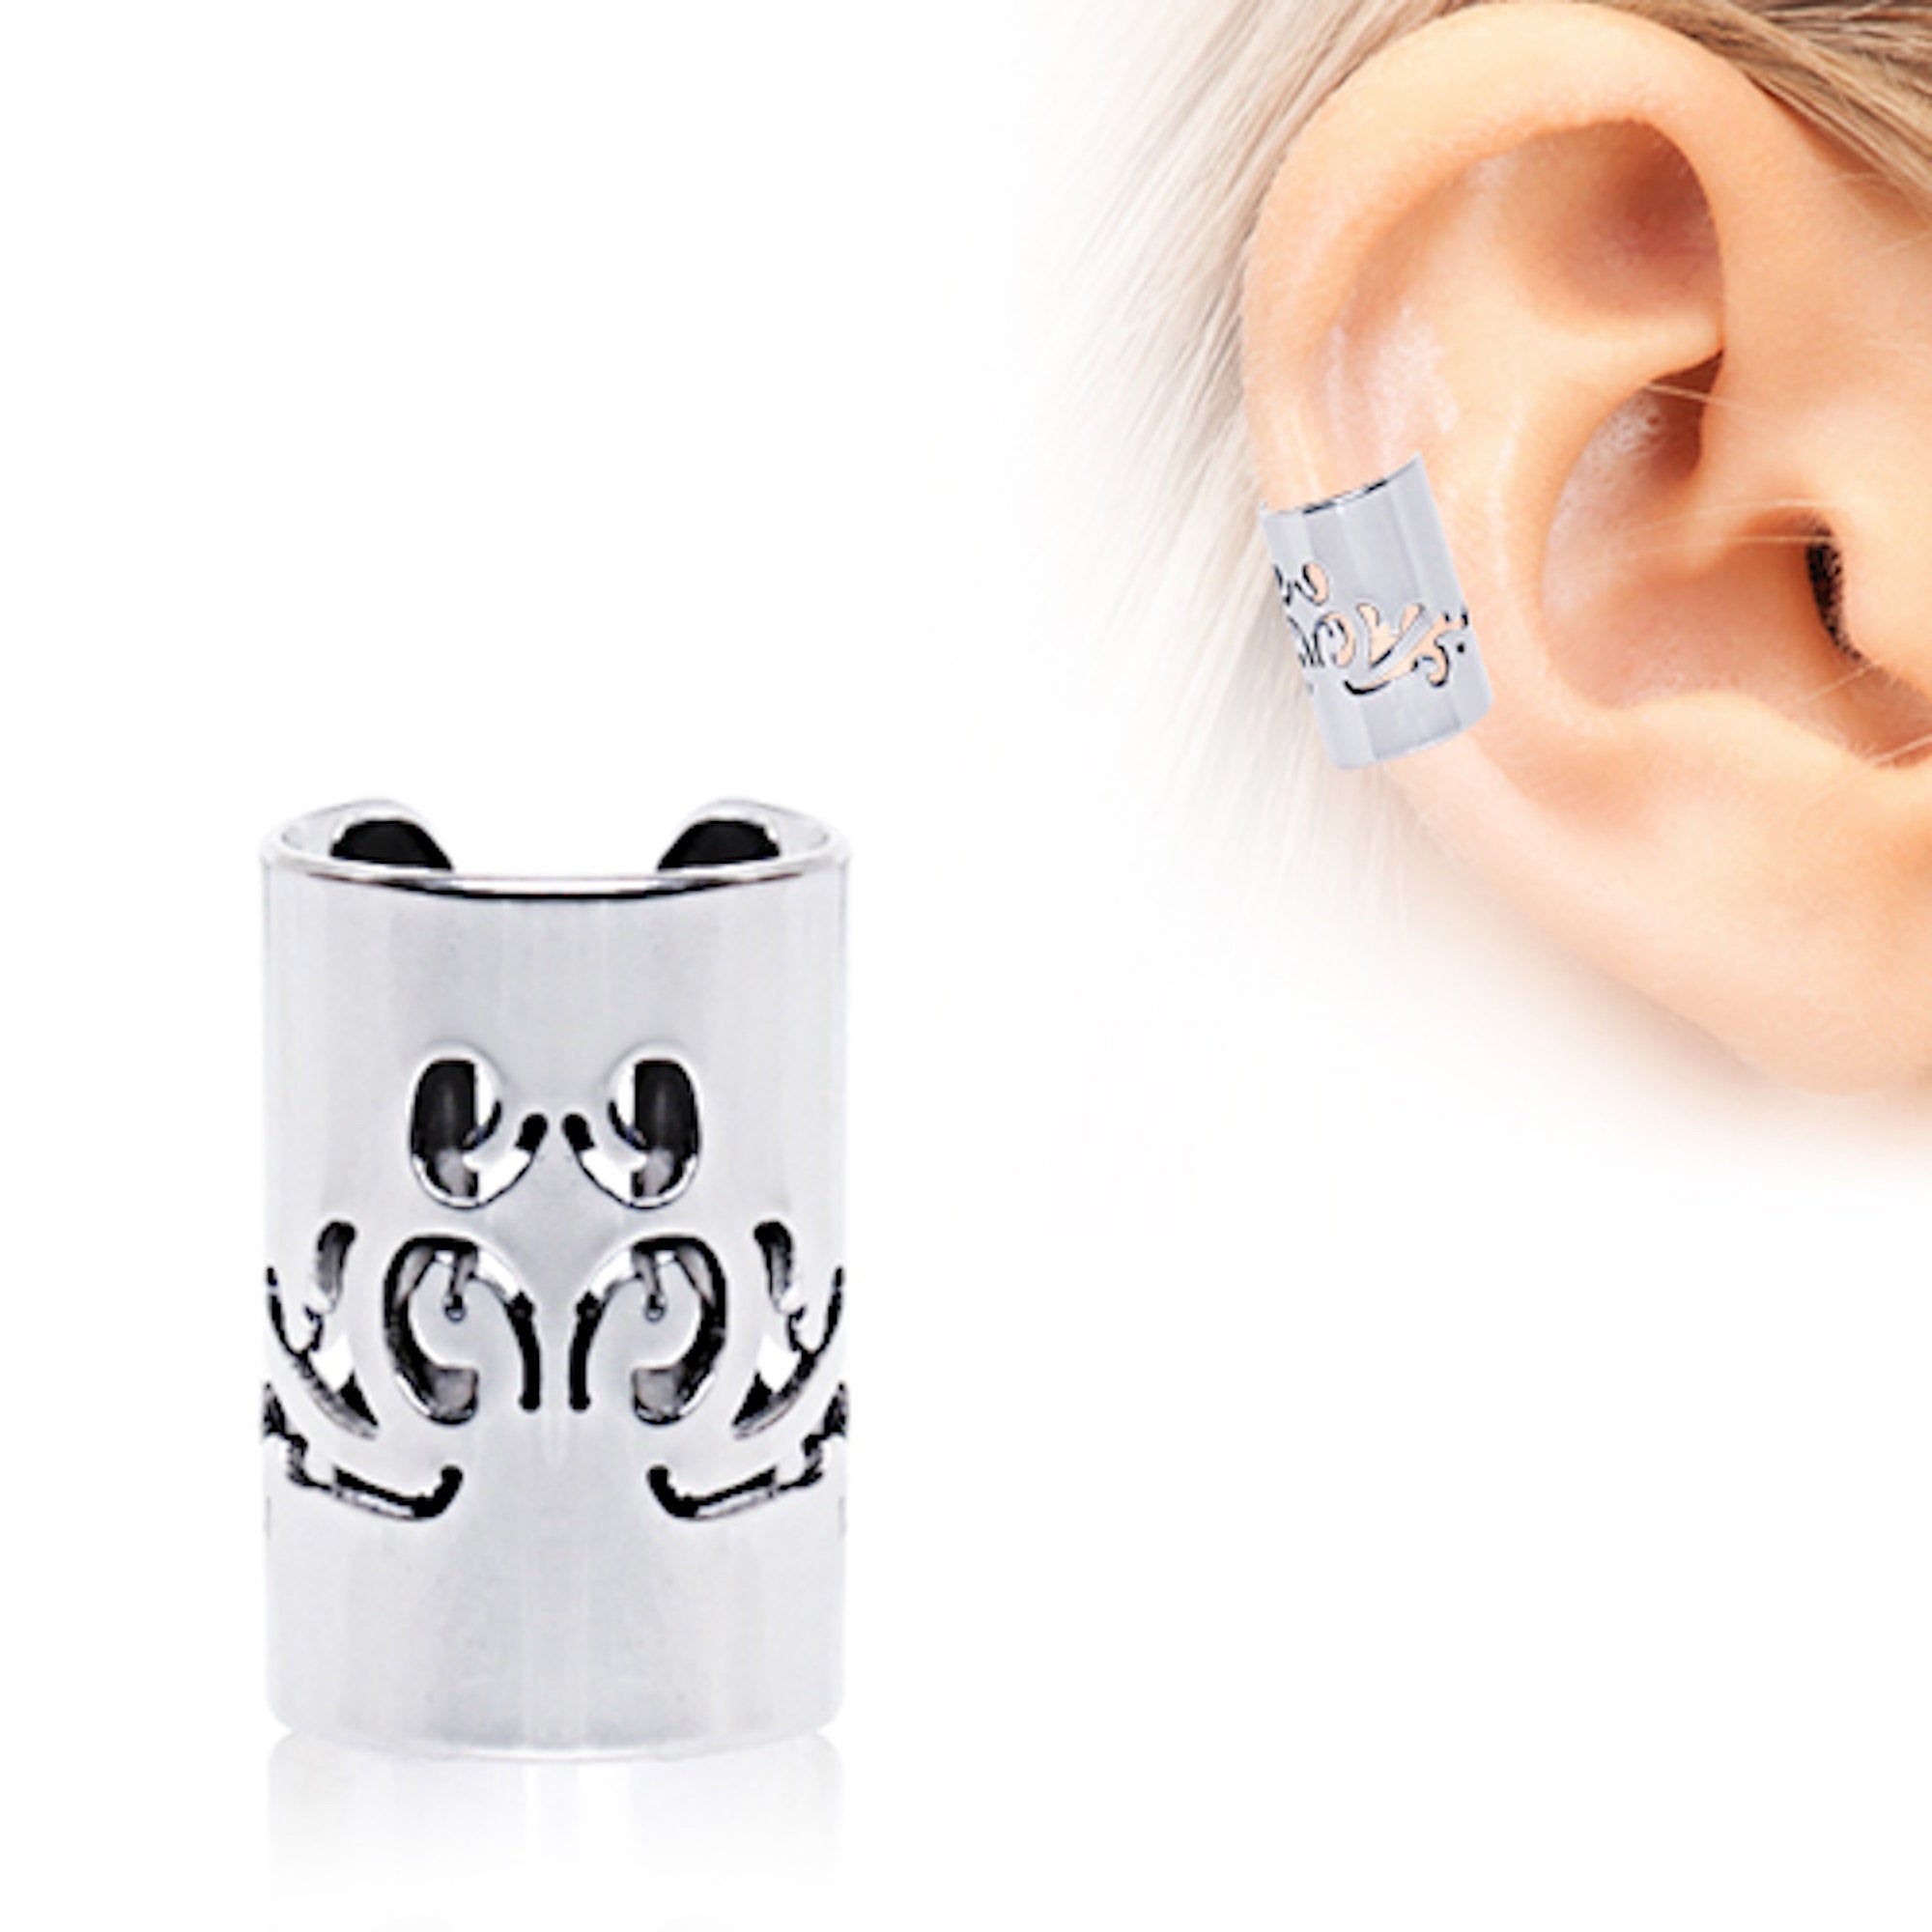 Stainless Steel Baroque Patterned Cartilage Ear Cuff.